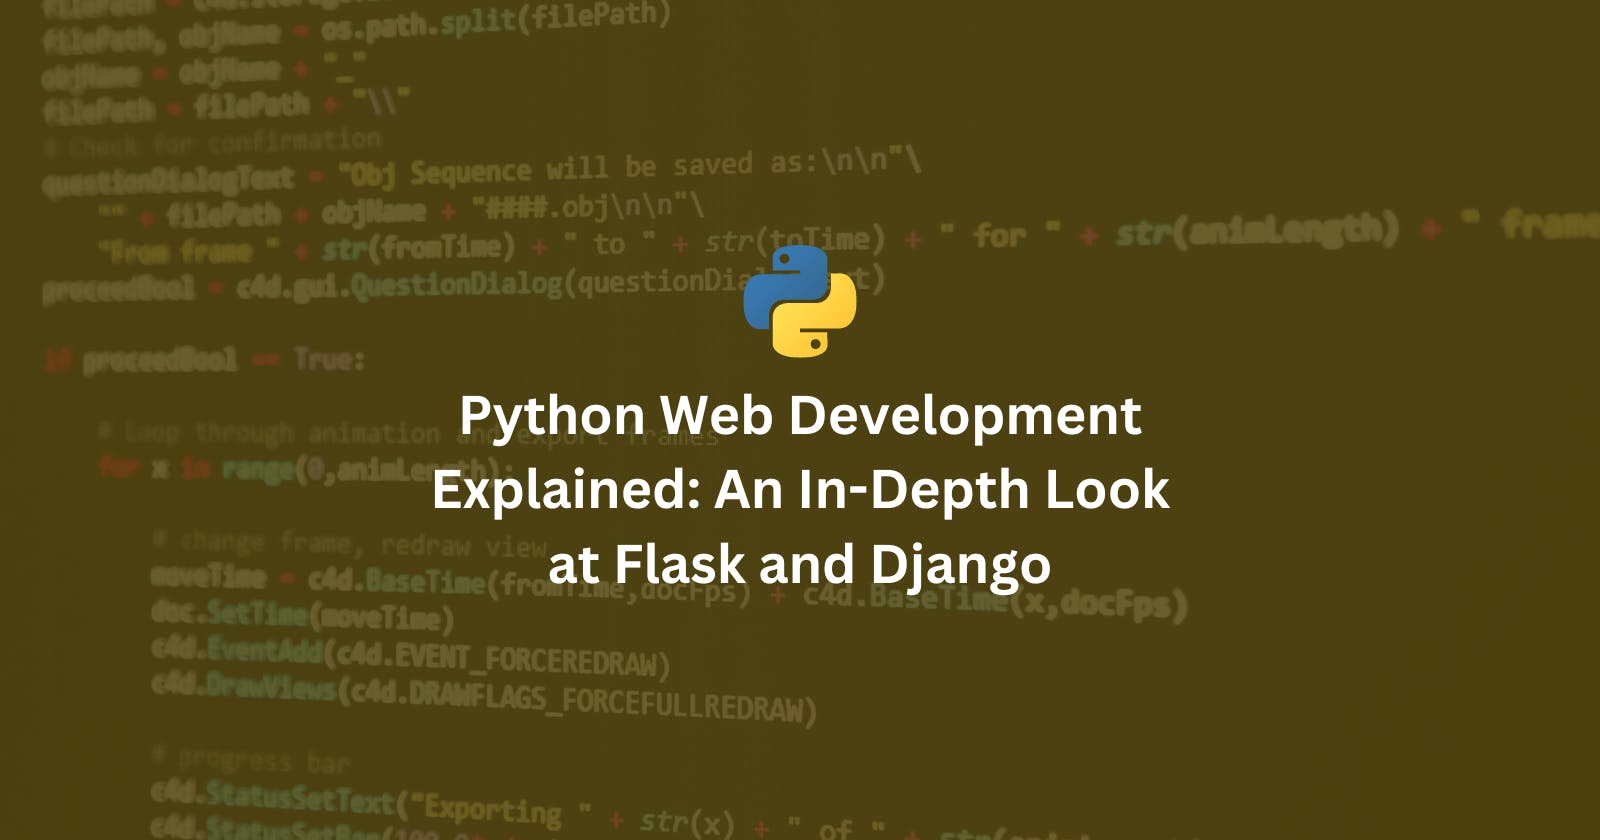 Python Web Development Explained: An In-Depth Look at Flask and Django